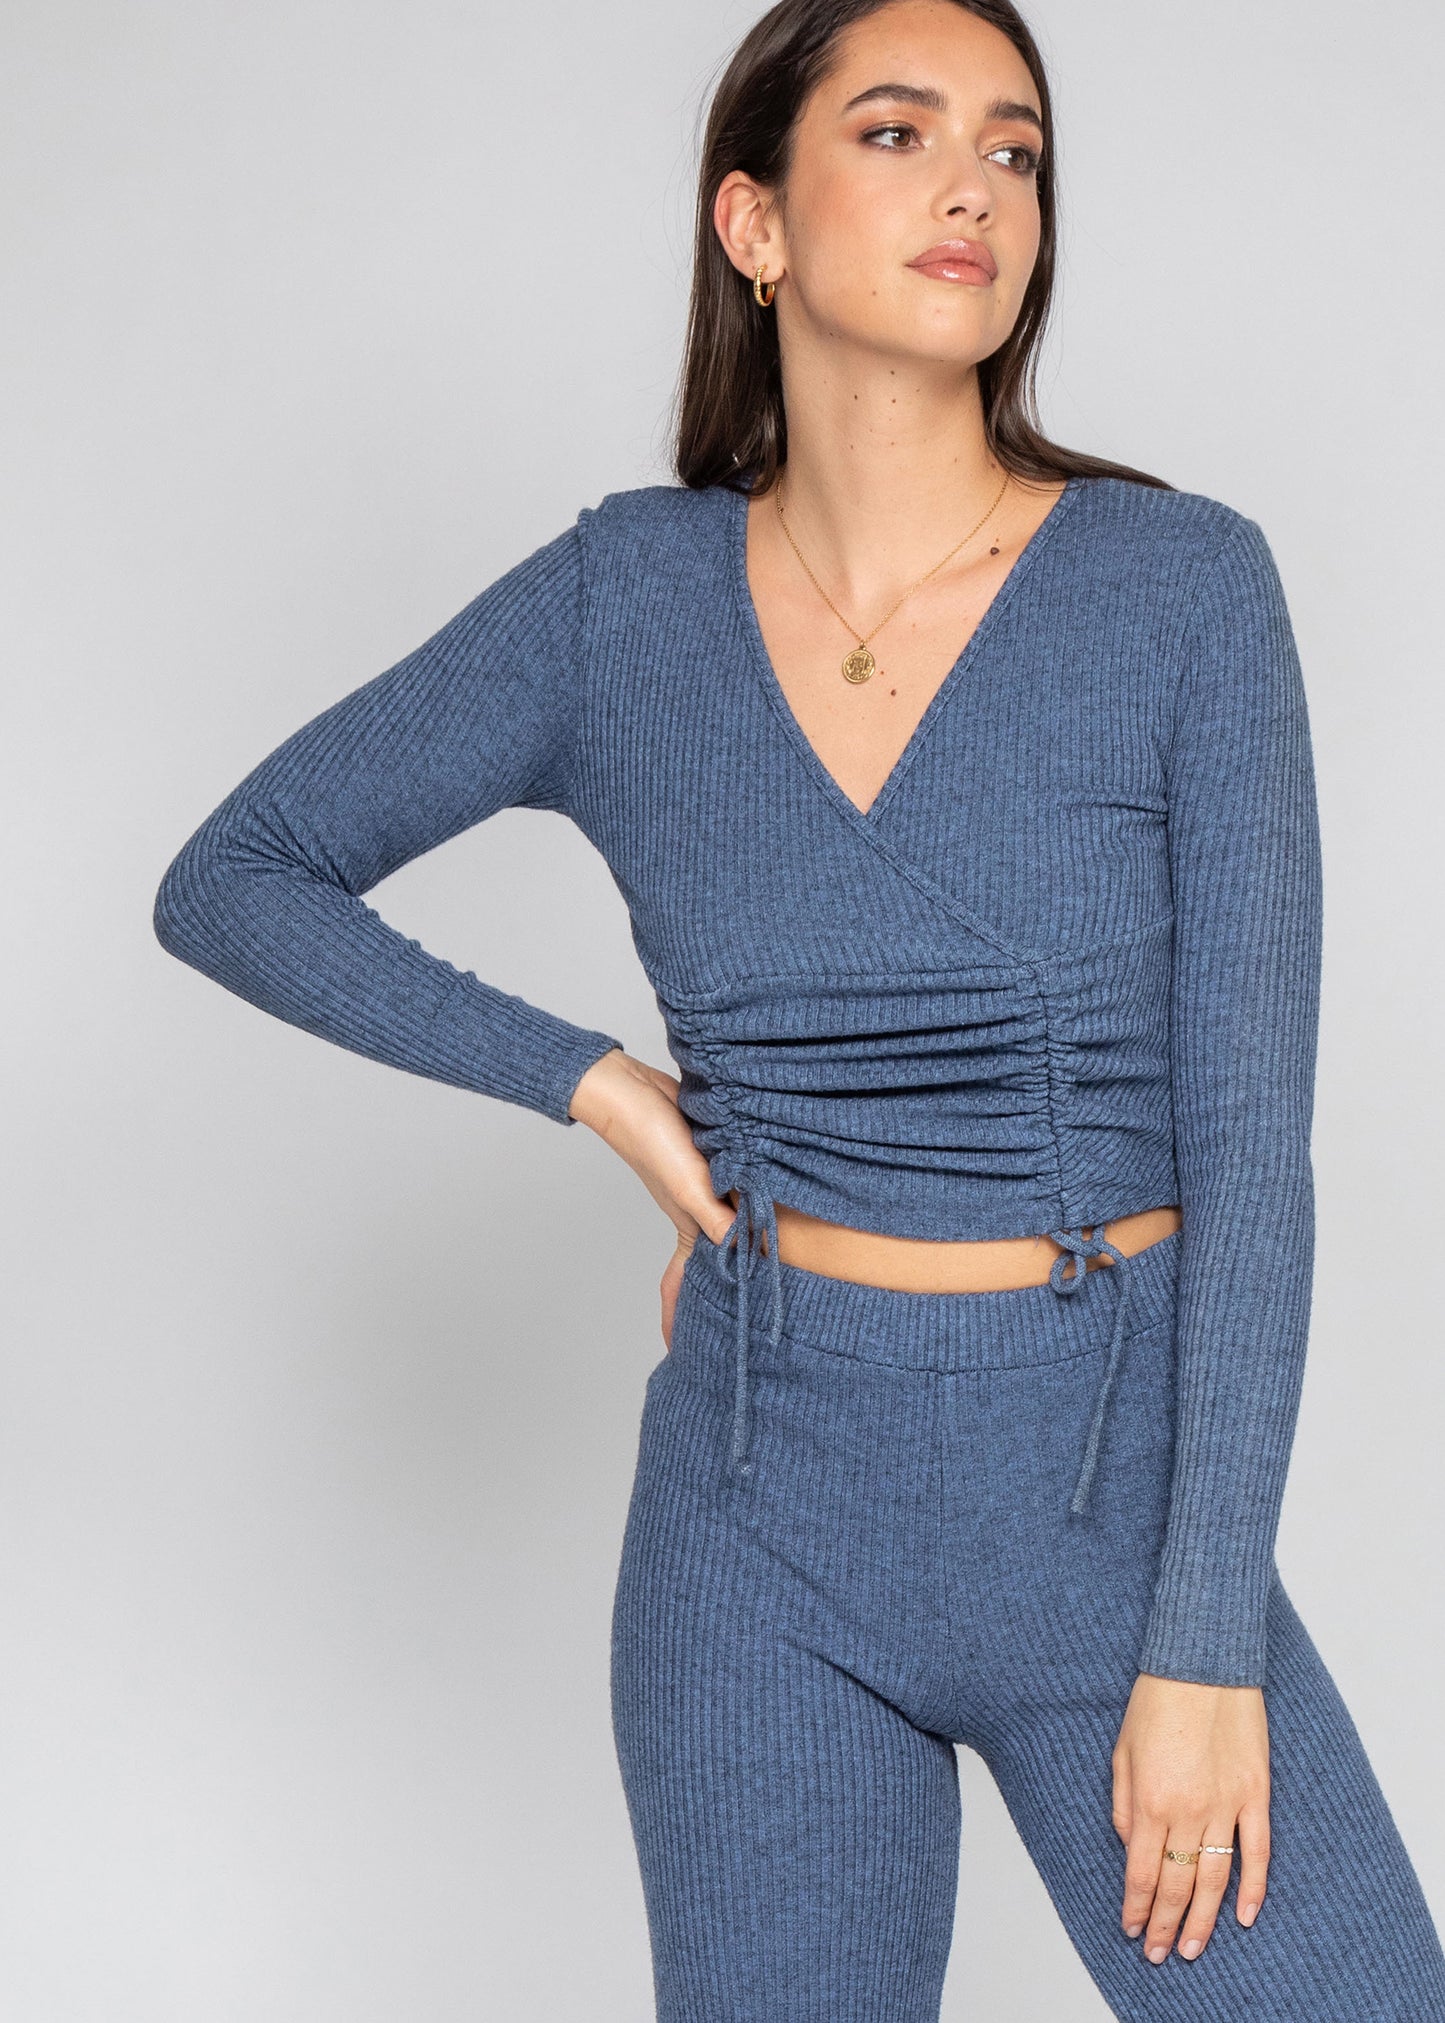 Wrap top with ruched front in blue